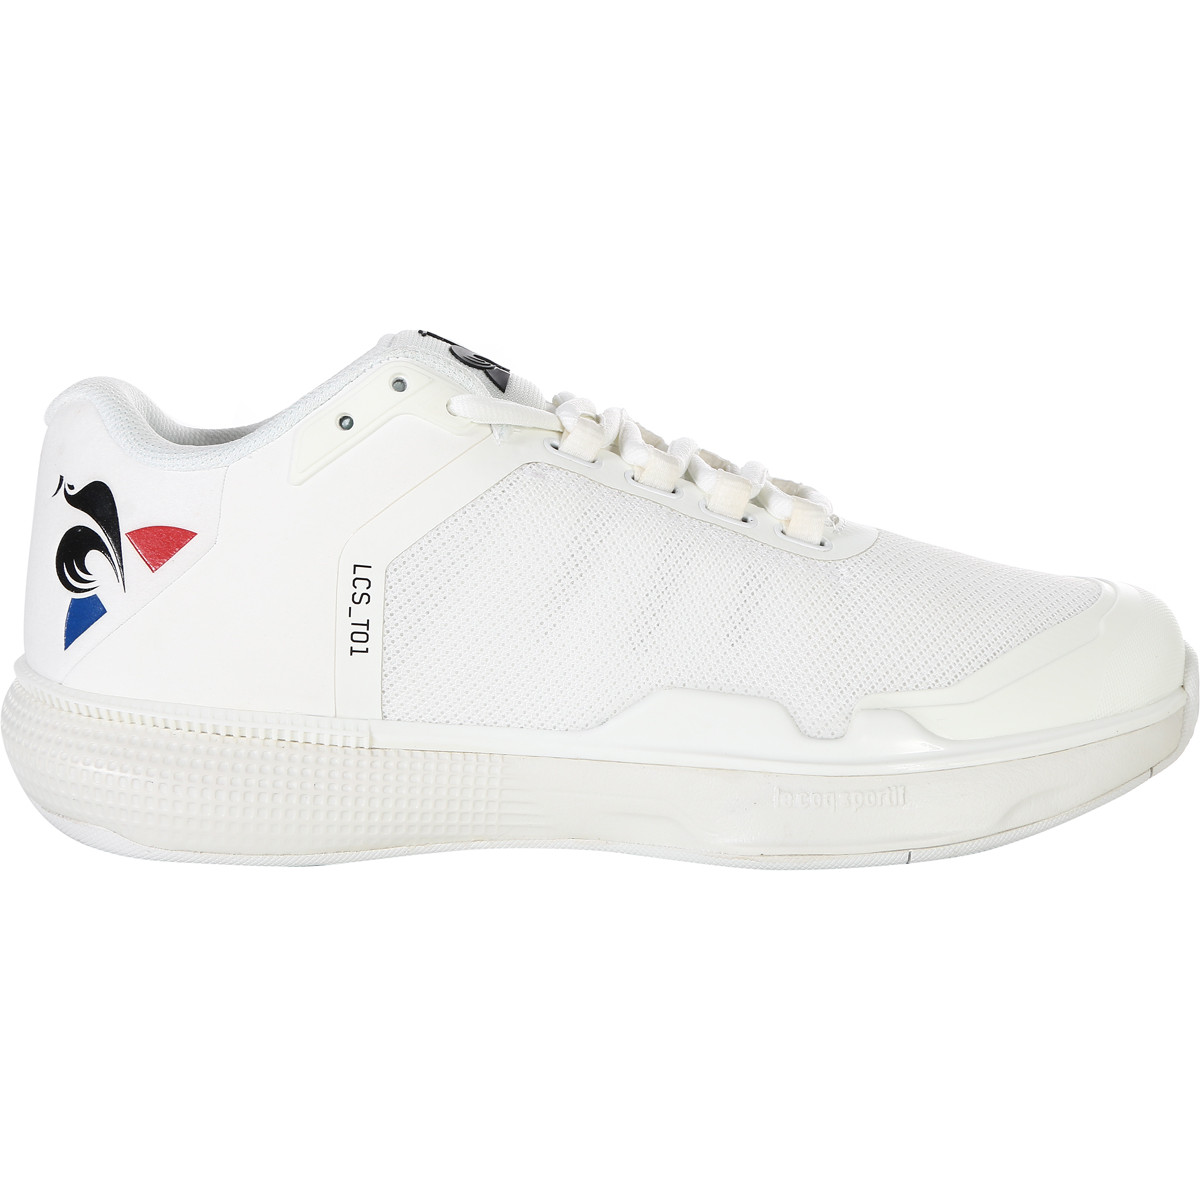 CHAUSSURES LE COQ SPORTIF LCS T01 TERRE BATTUE